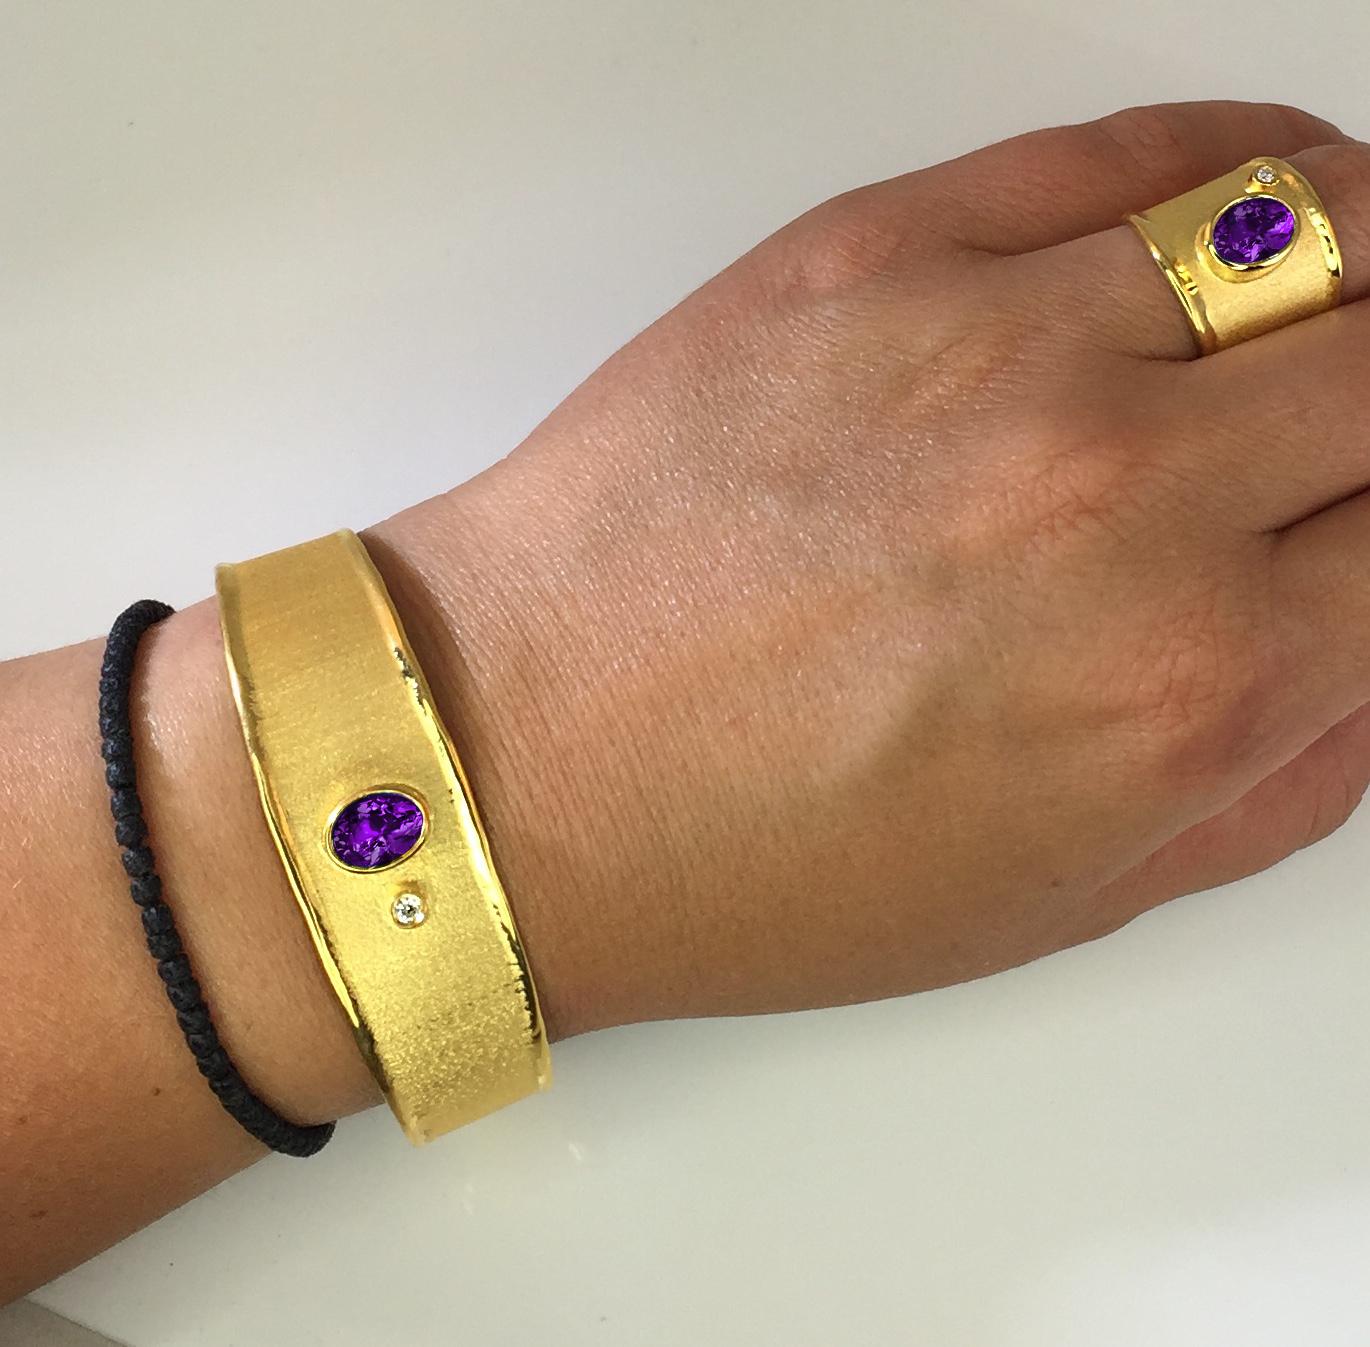 Yianni Creations 18 Karat Solid Gold Bracelet and Ring are all handcrafted in our workshop in Greece. This stunning artisan bracelet and ring feature respectively each an oval cut Amethyst the weight of 1.75 Carat and 1.25 Carat accompanied by a